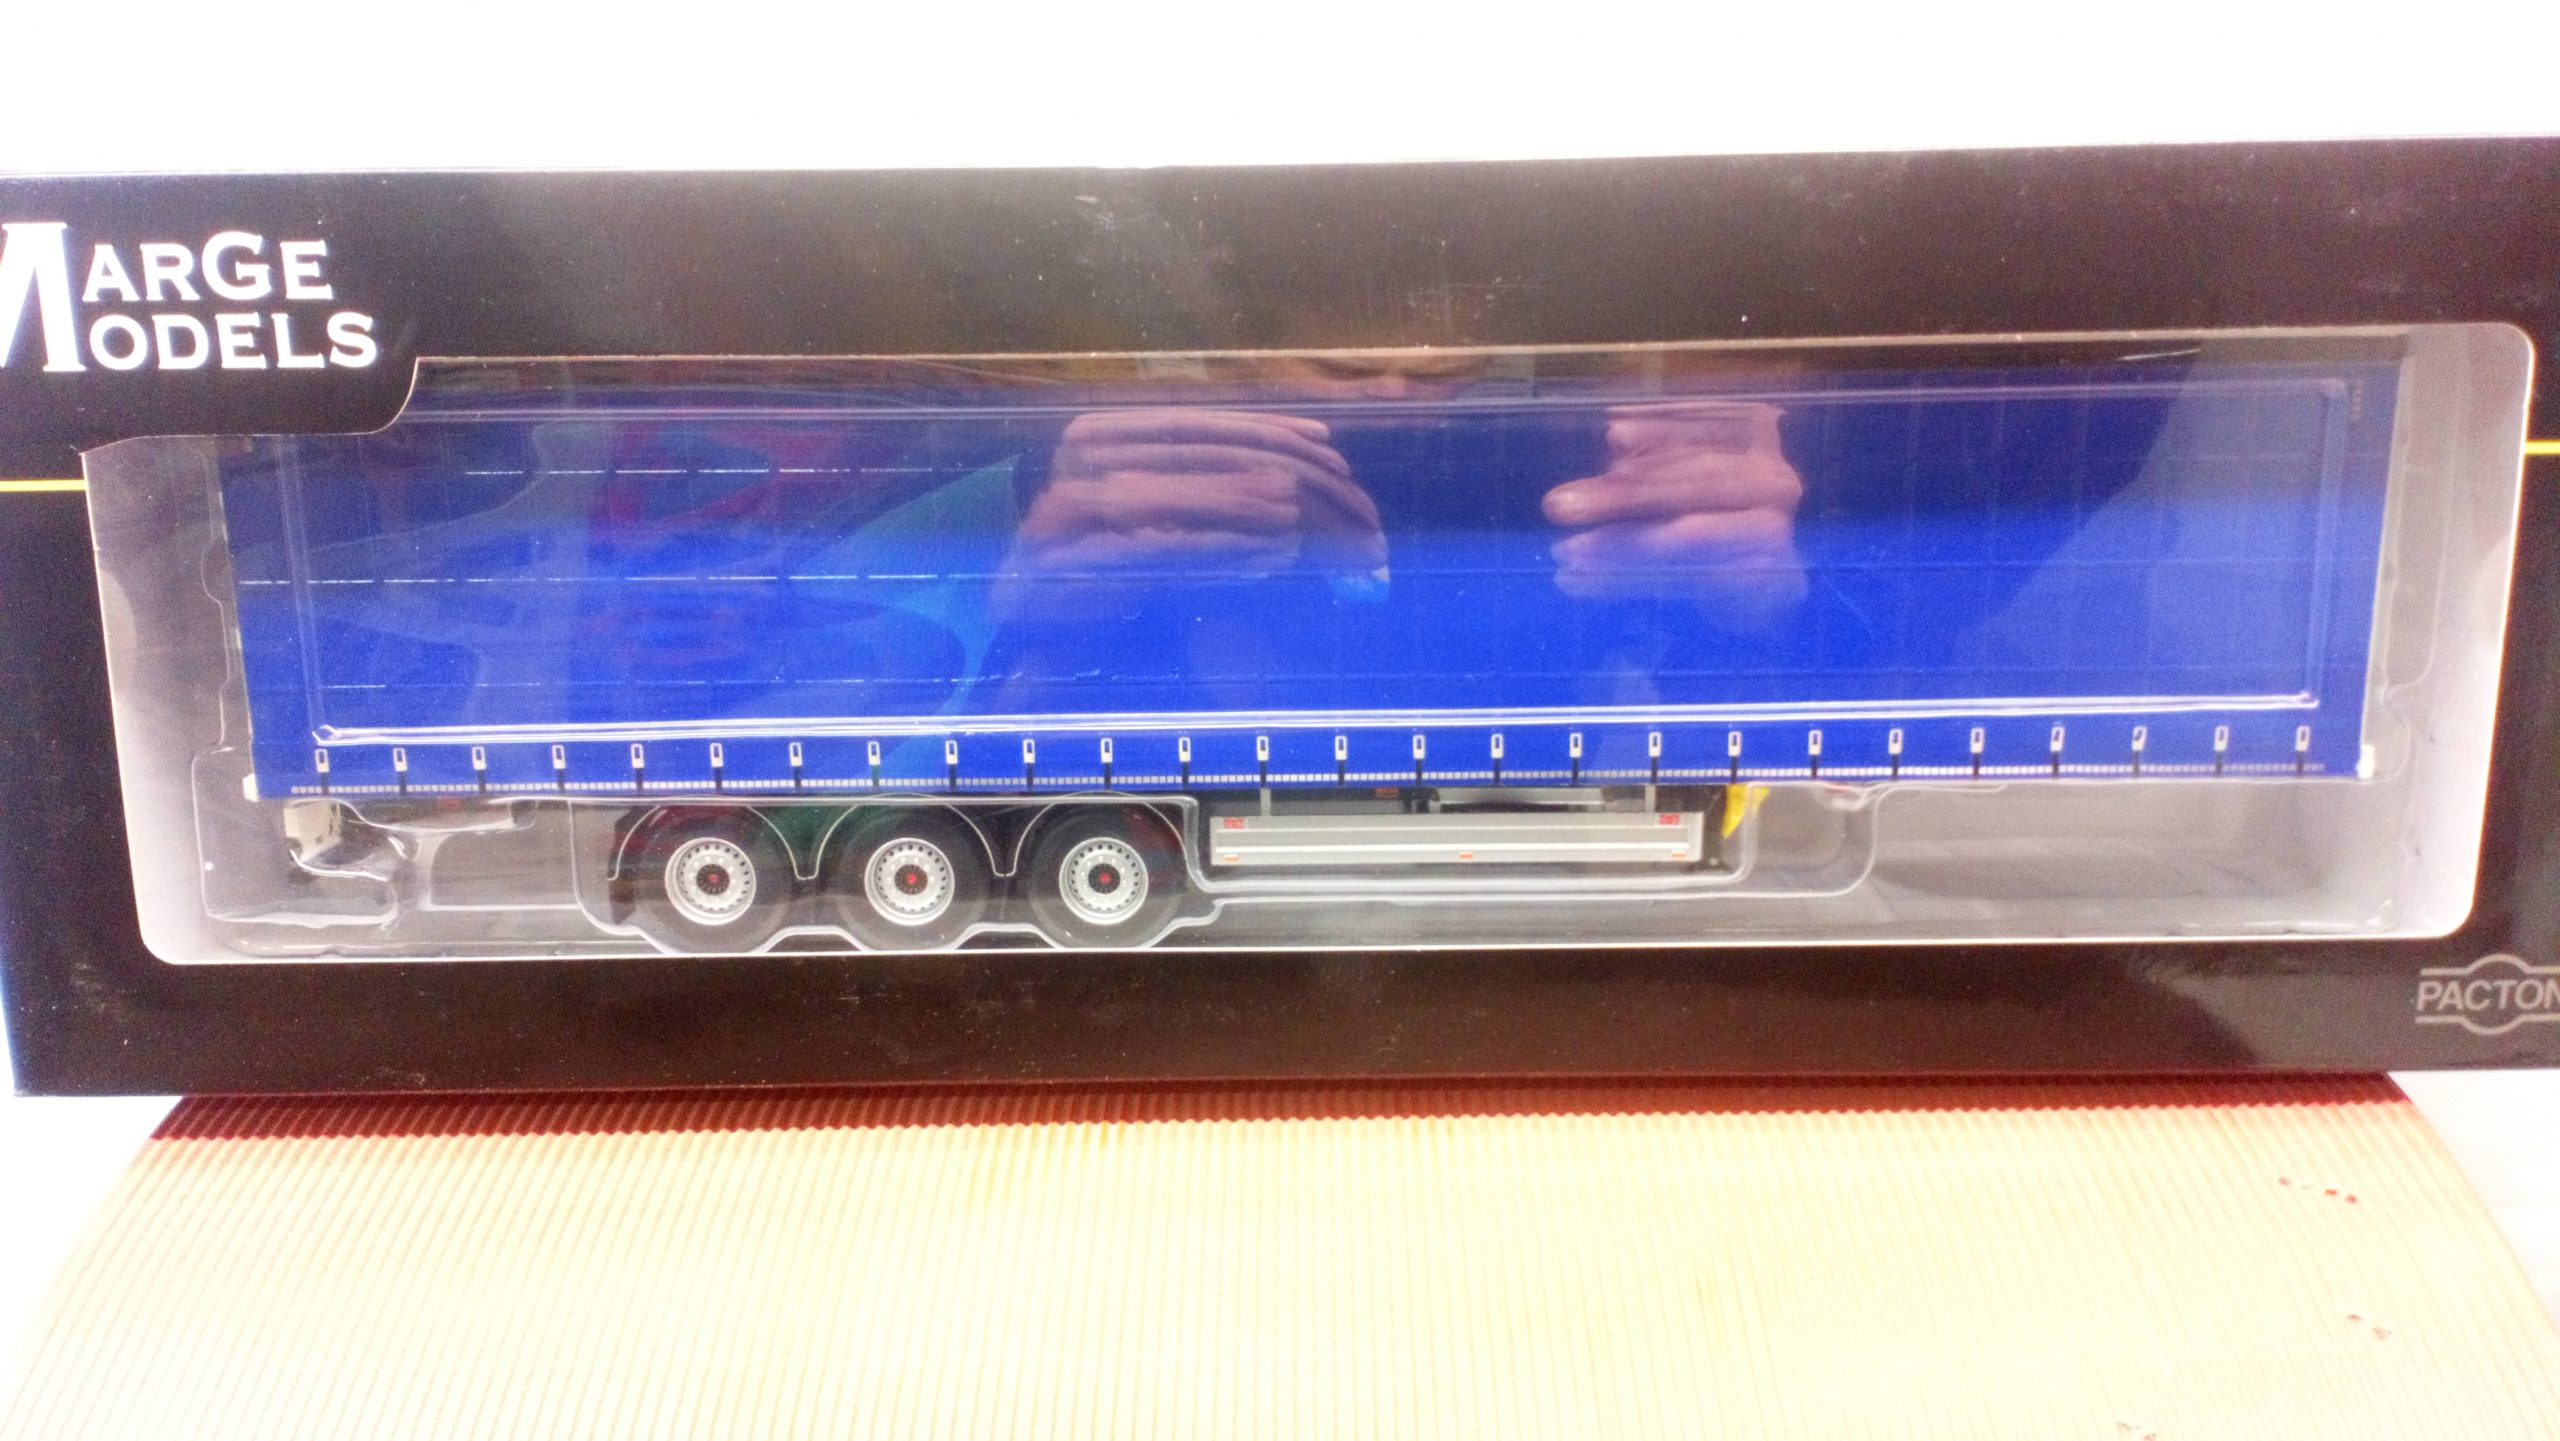 BLUE Details about   MARGE MODELS 1:32 SCALE PACTON CURTAINSIDE TRAILER 